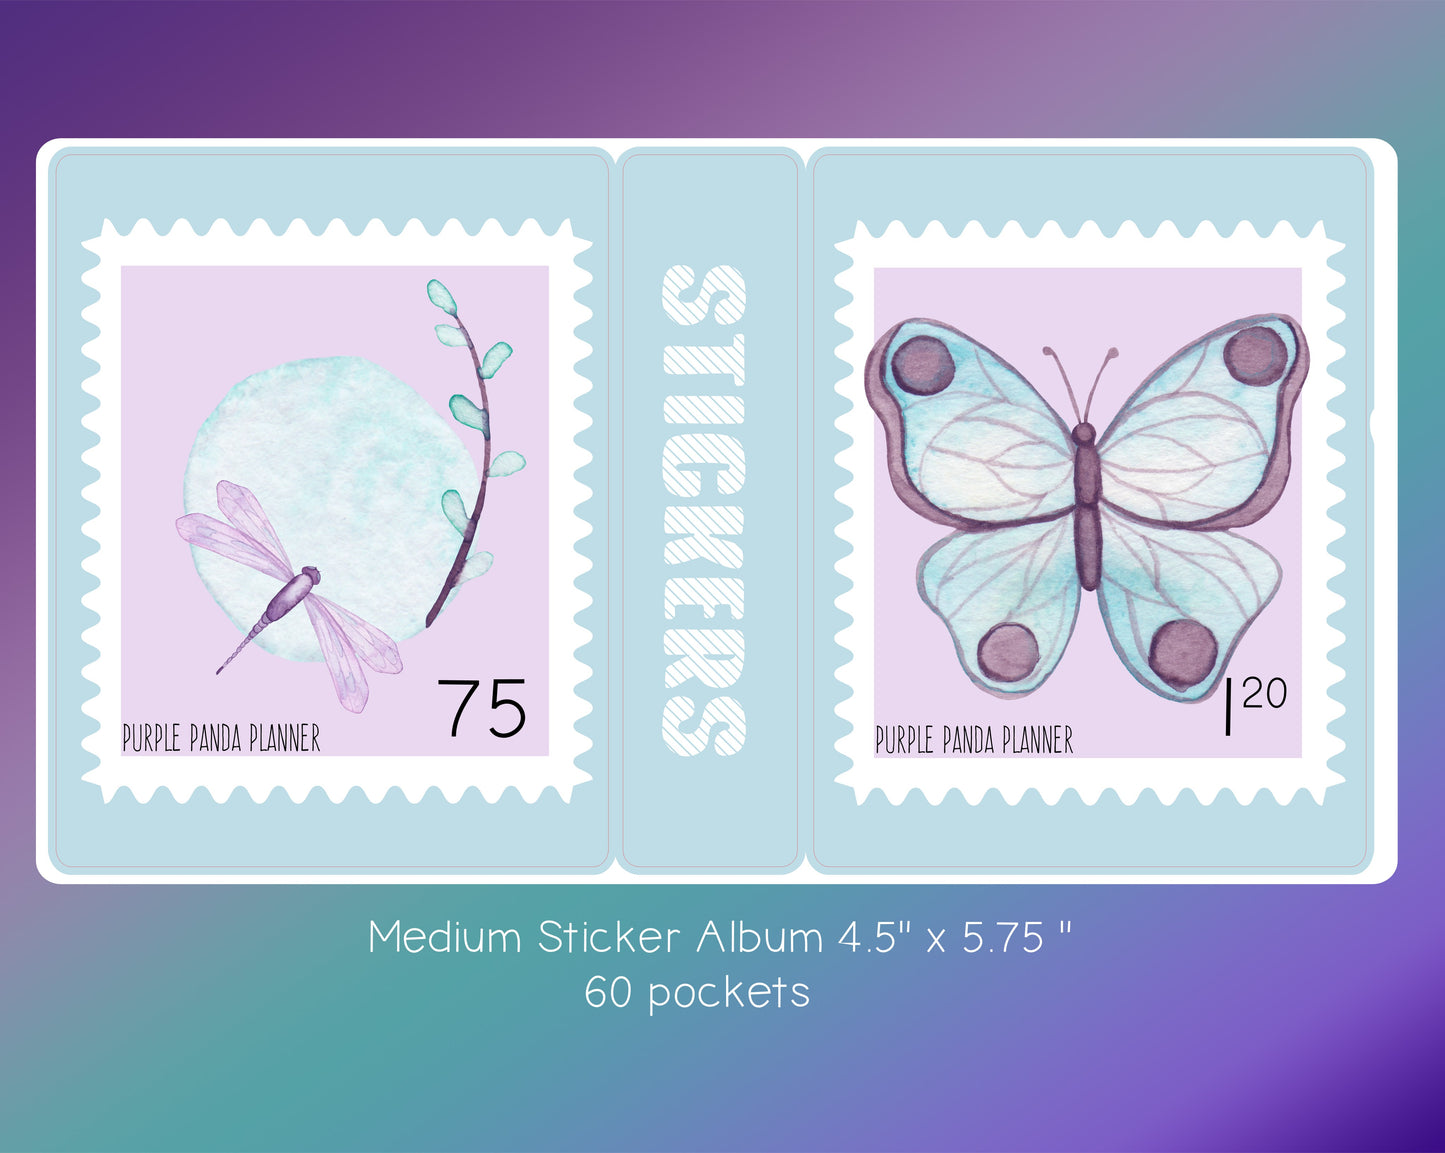 Medium Sticker Album (4.5" x 5.75") - Violet Butterfly Stamps Cover